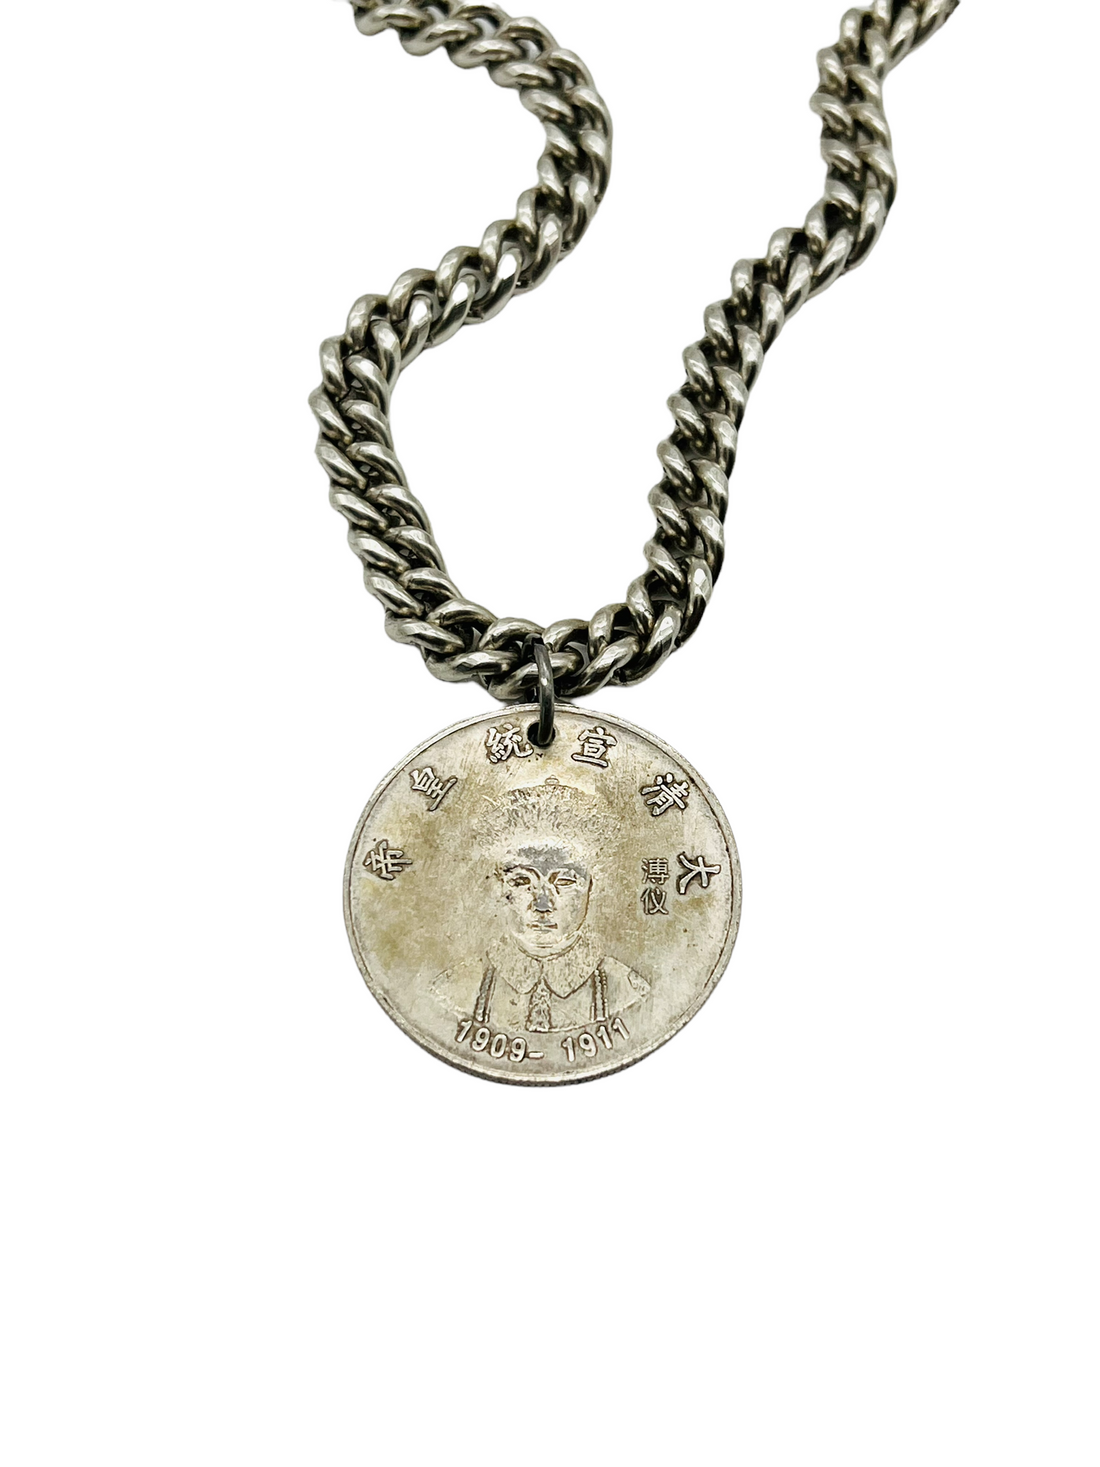 Qing Dynasty Coin Necklace